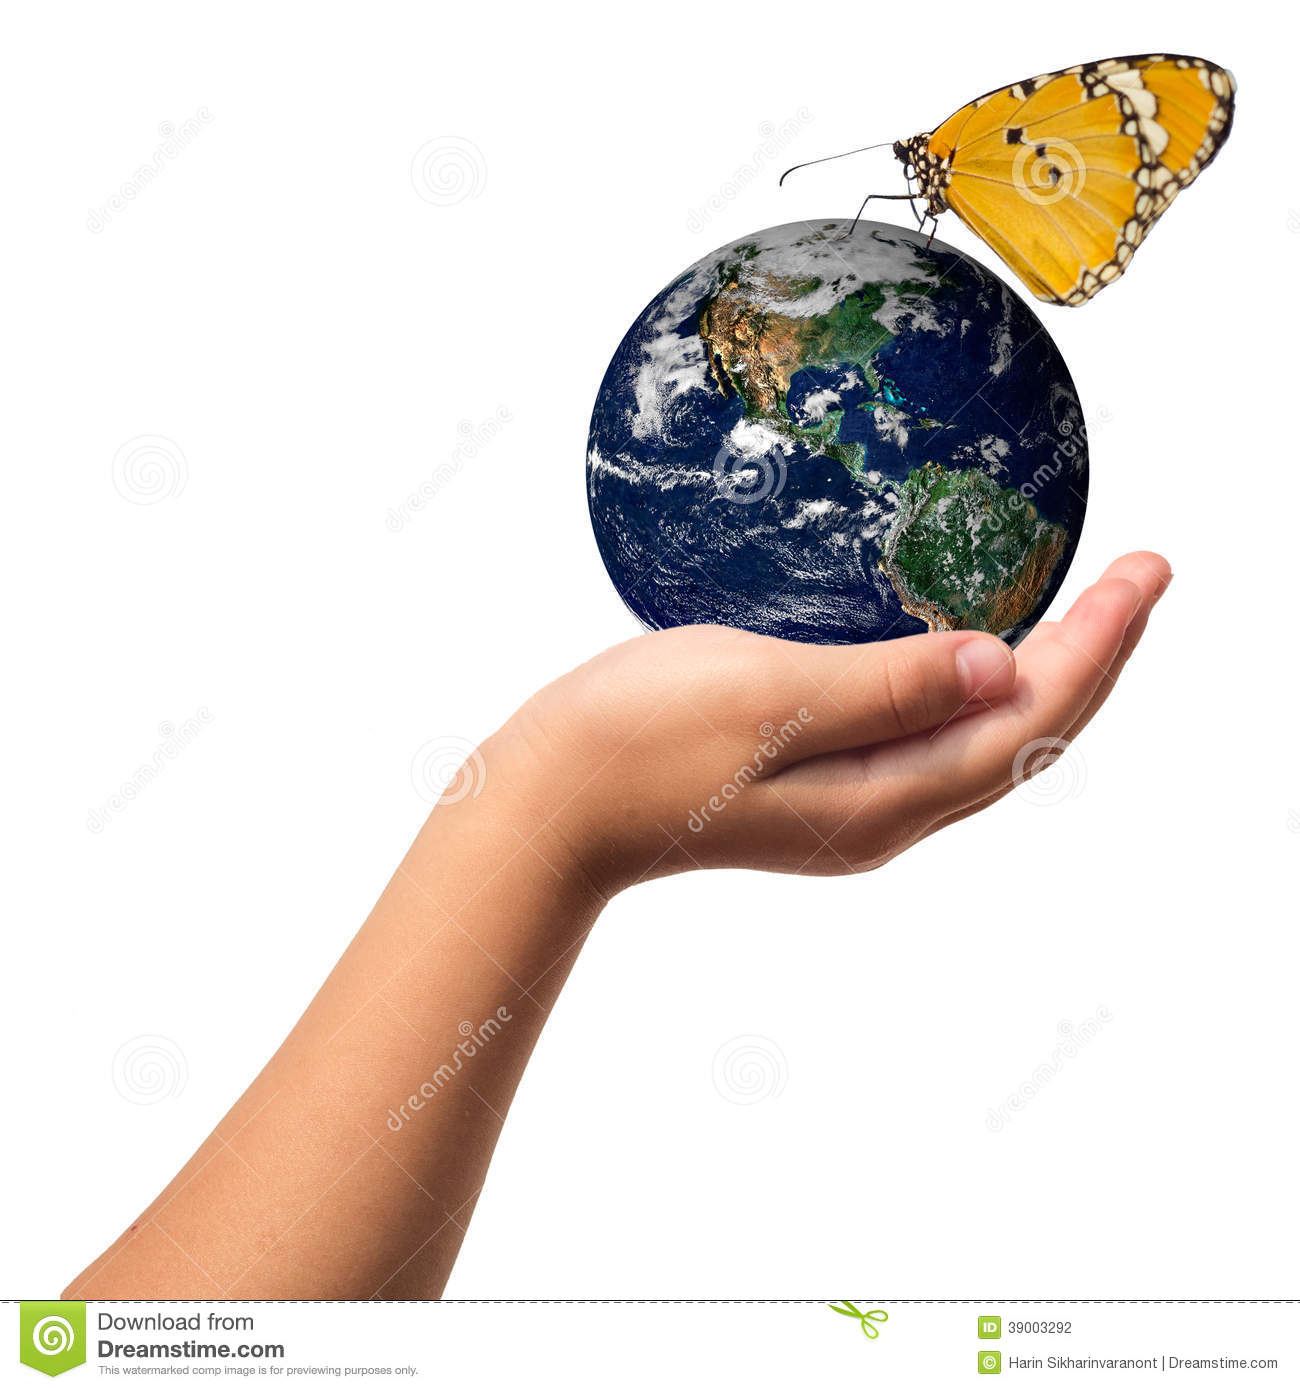 Earth Care With Helping Hands Concept Stock Photo   Image  39003292